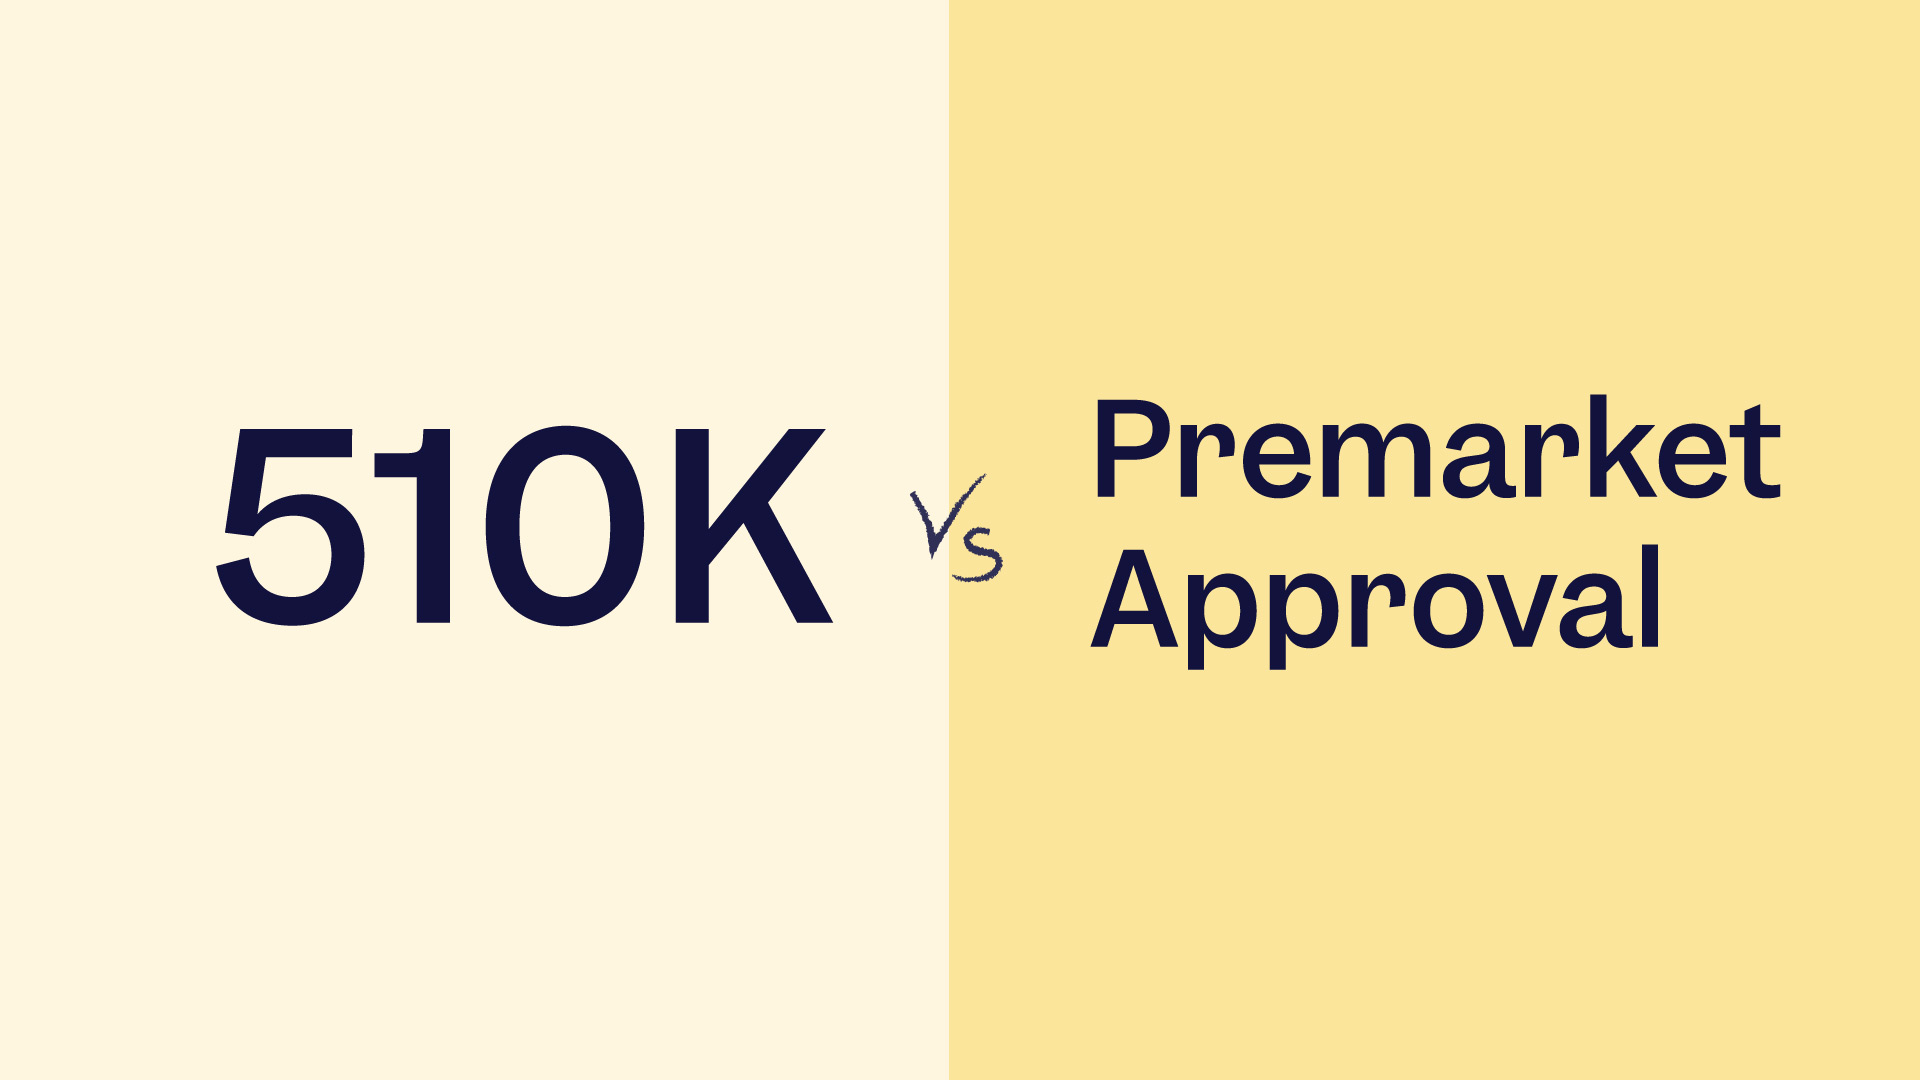 510K vs. Premarket Approval: What Are the Key Differences?